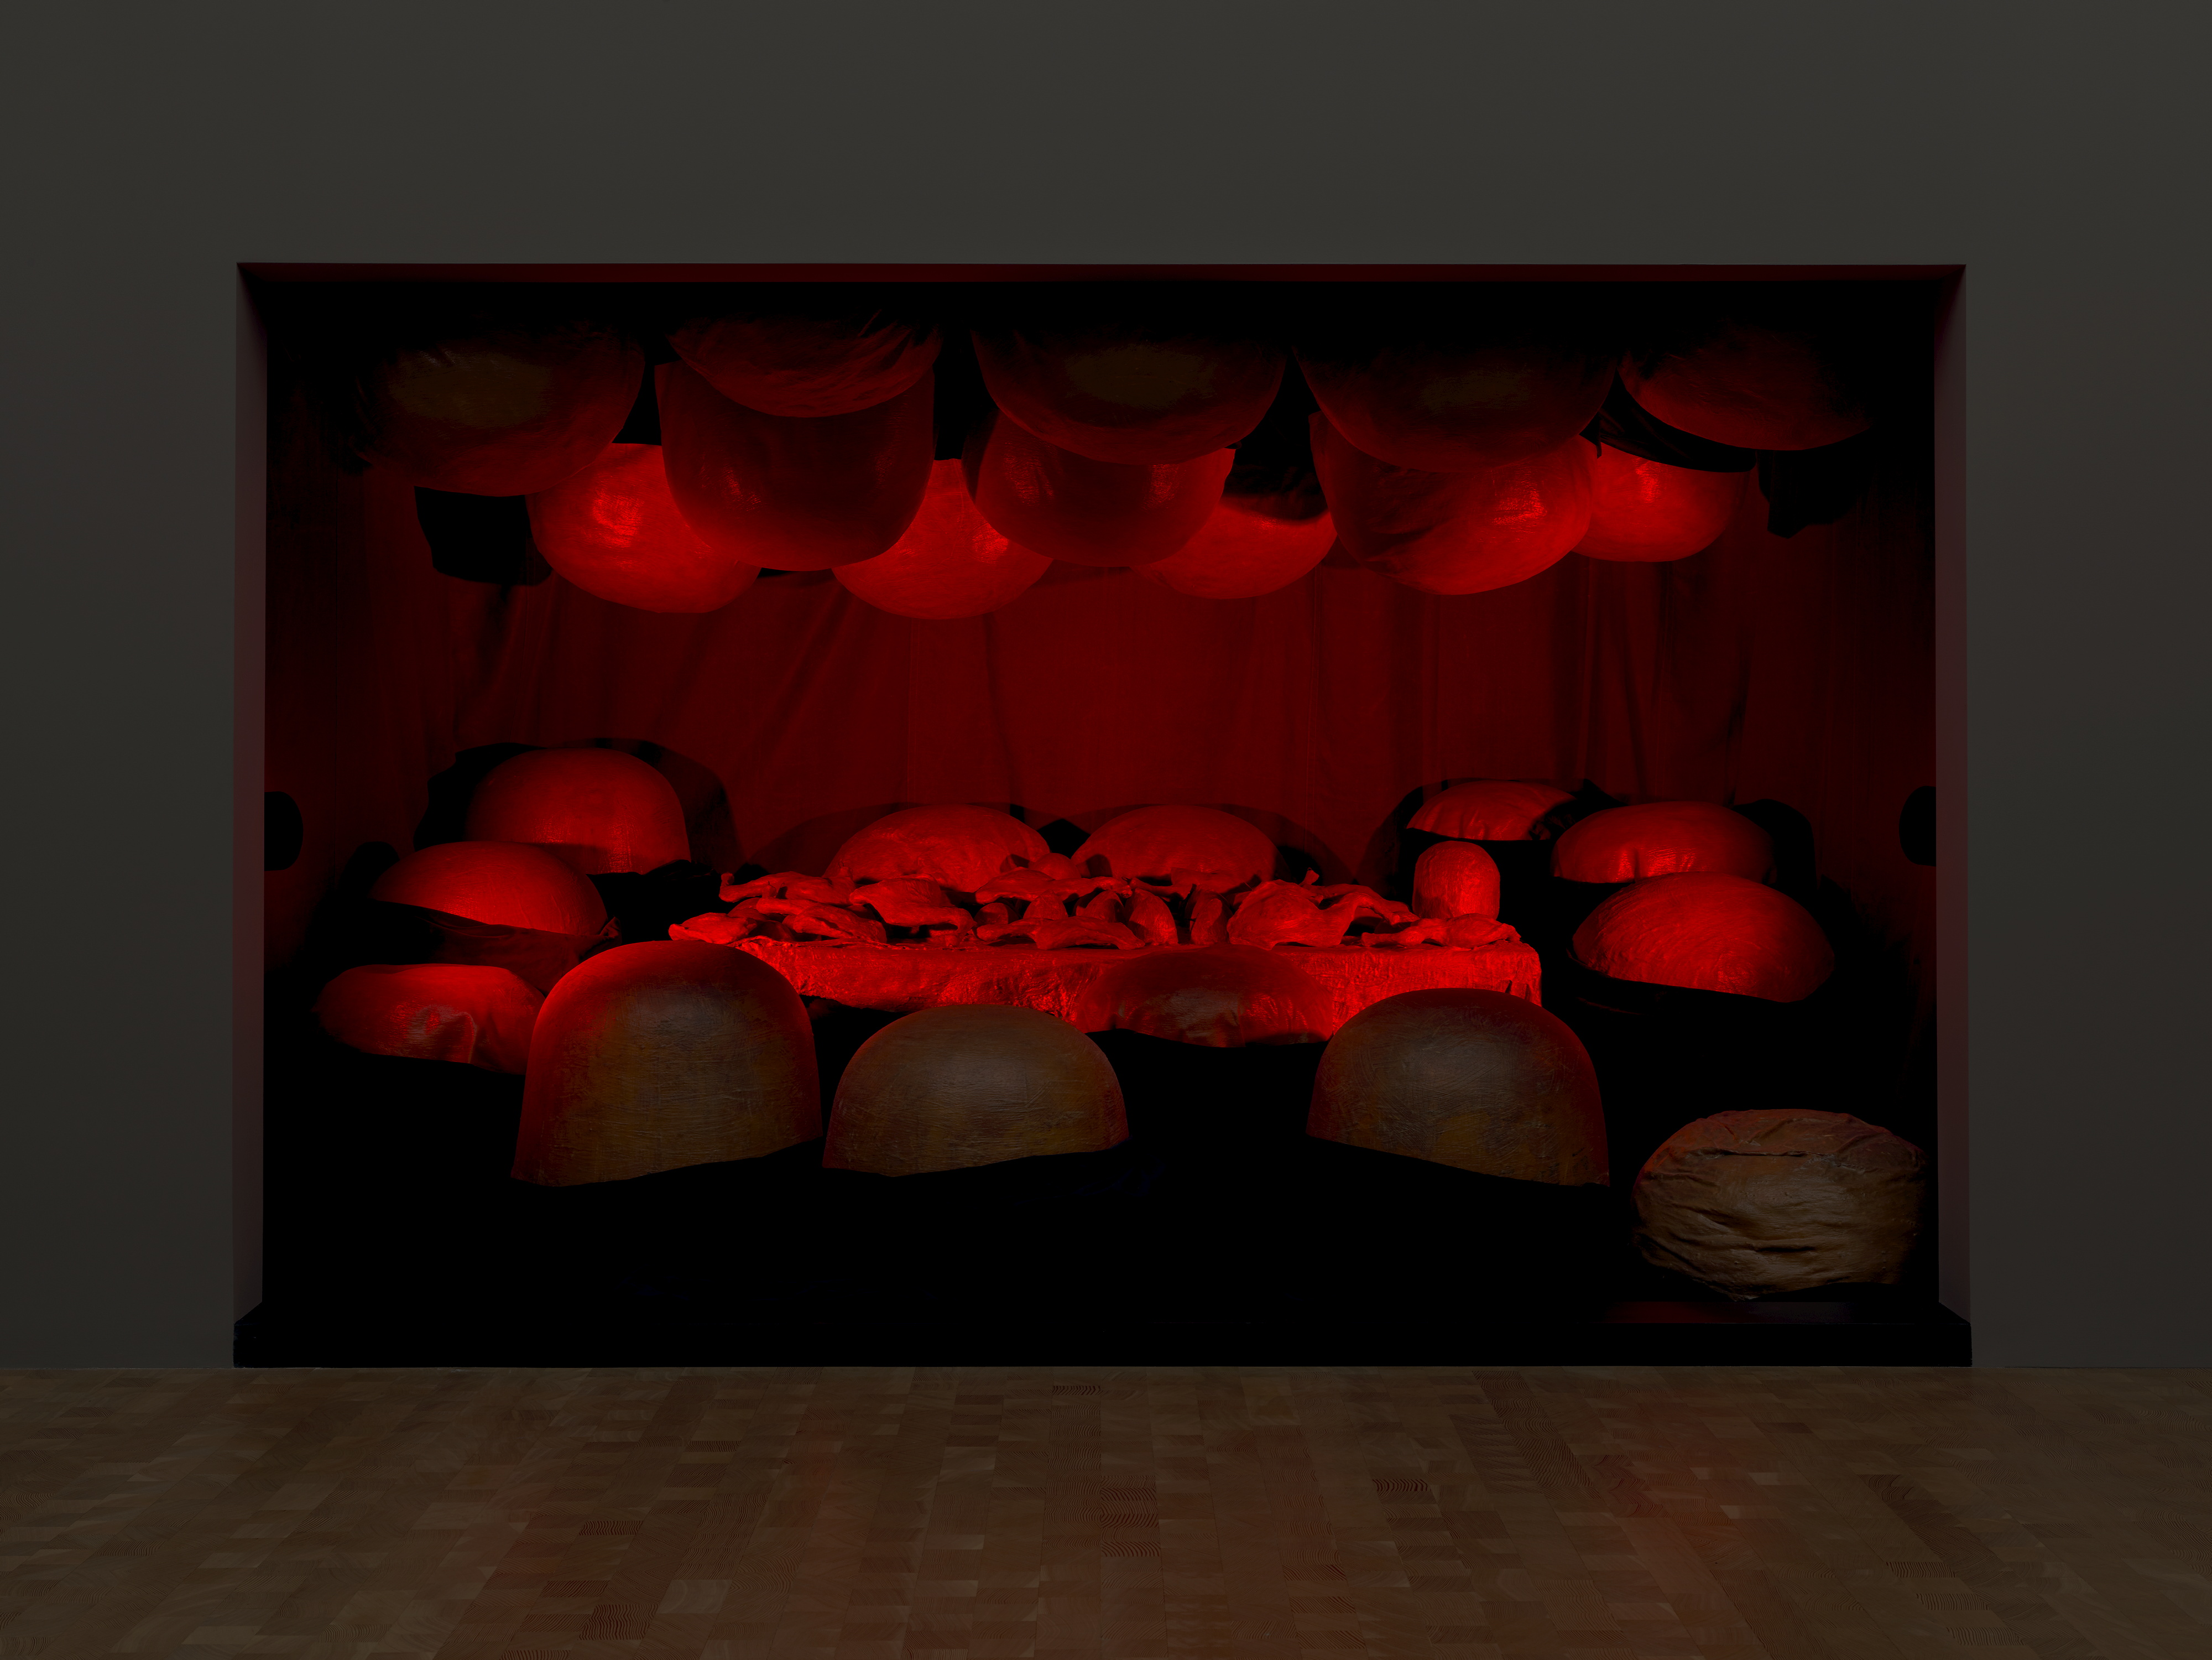 Installation art of red circle bubbles on roof and floor in red lit dark room. 